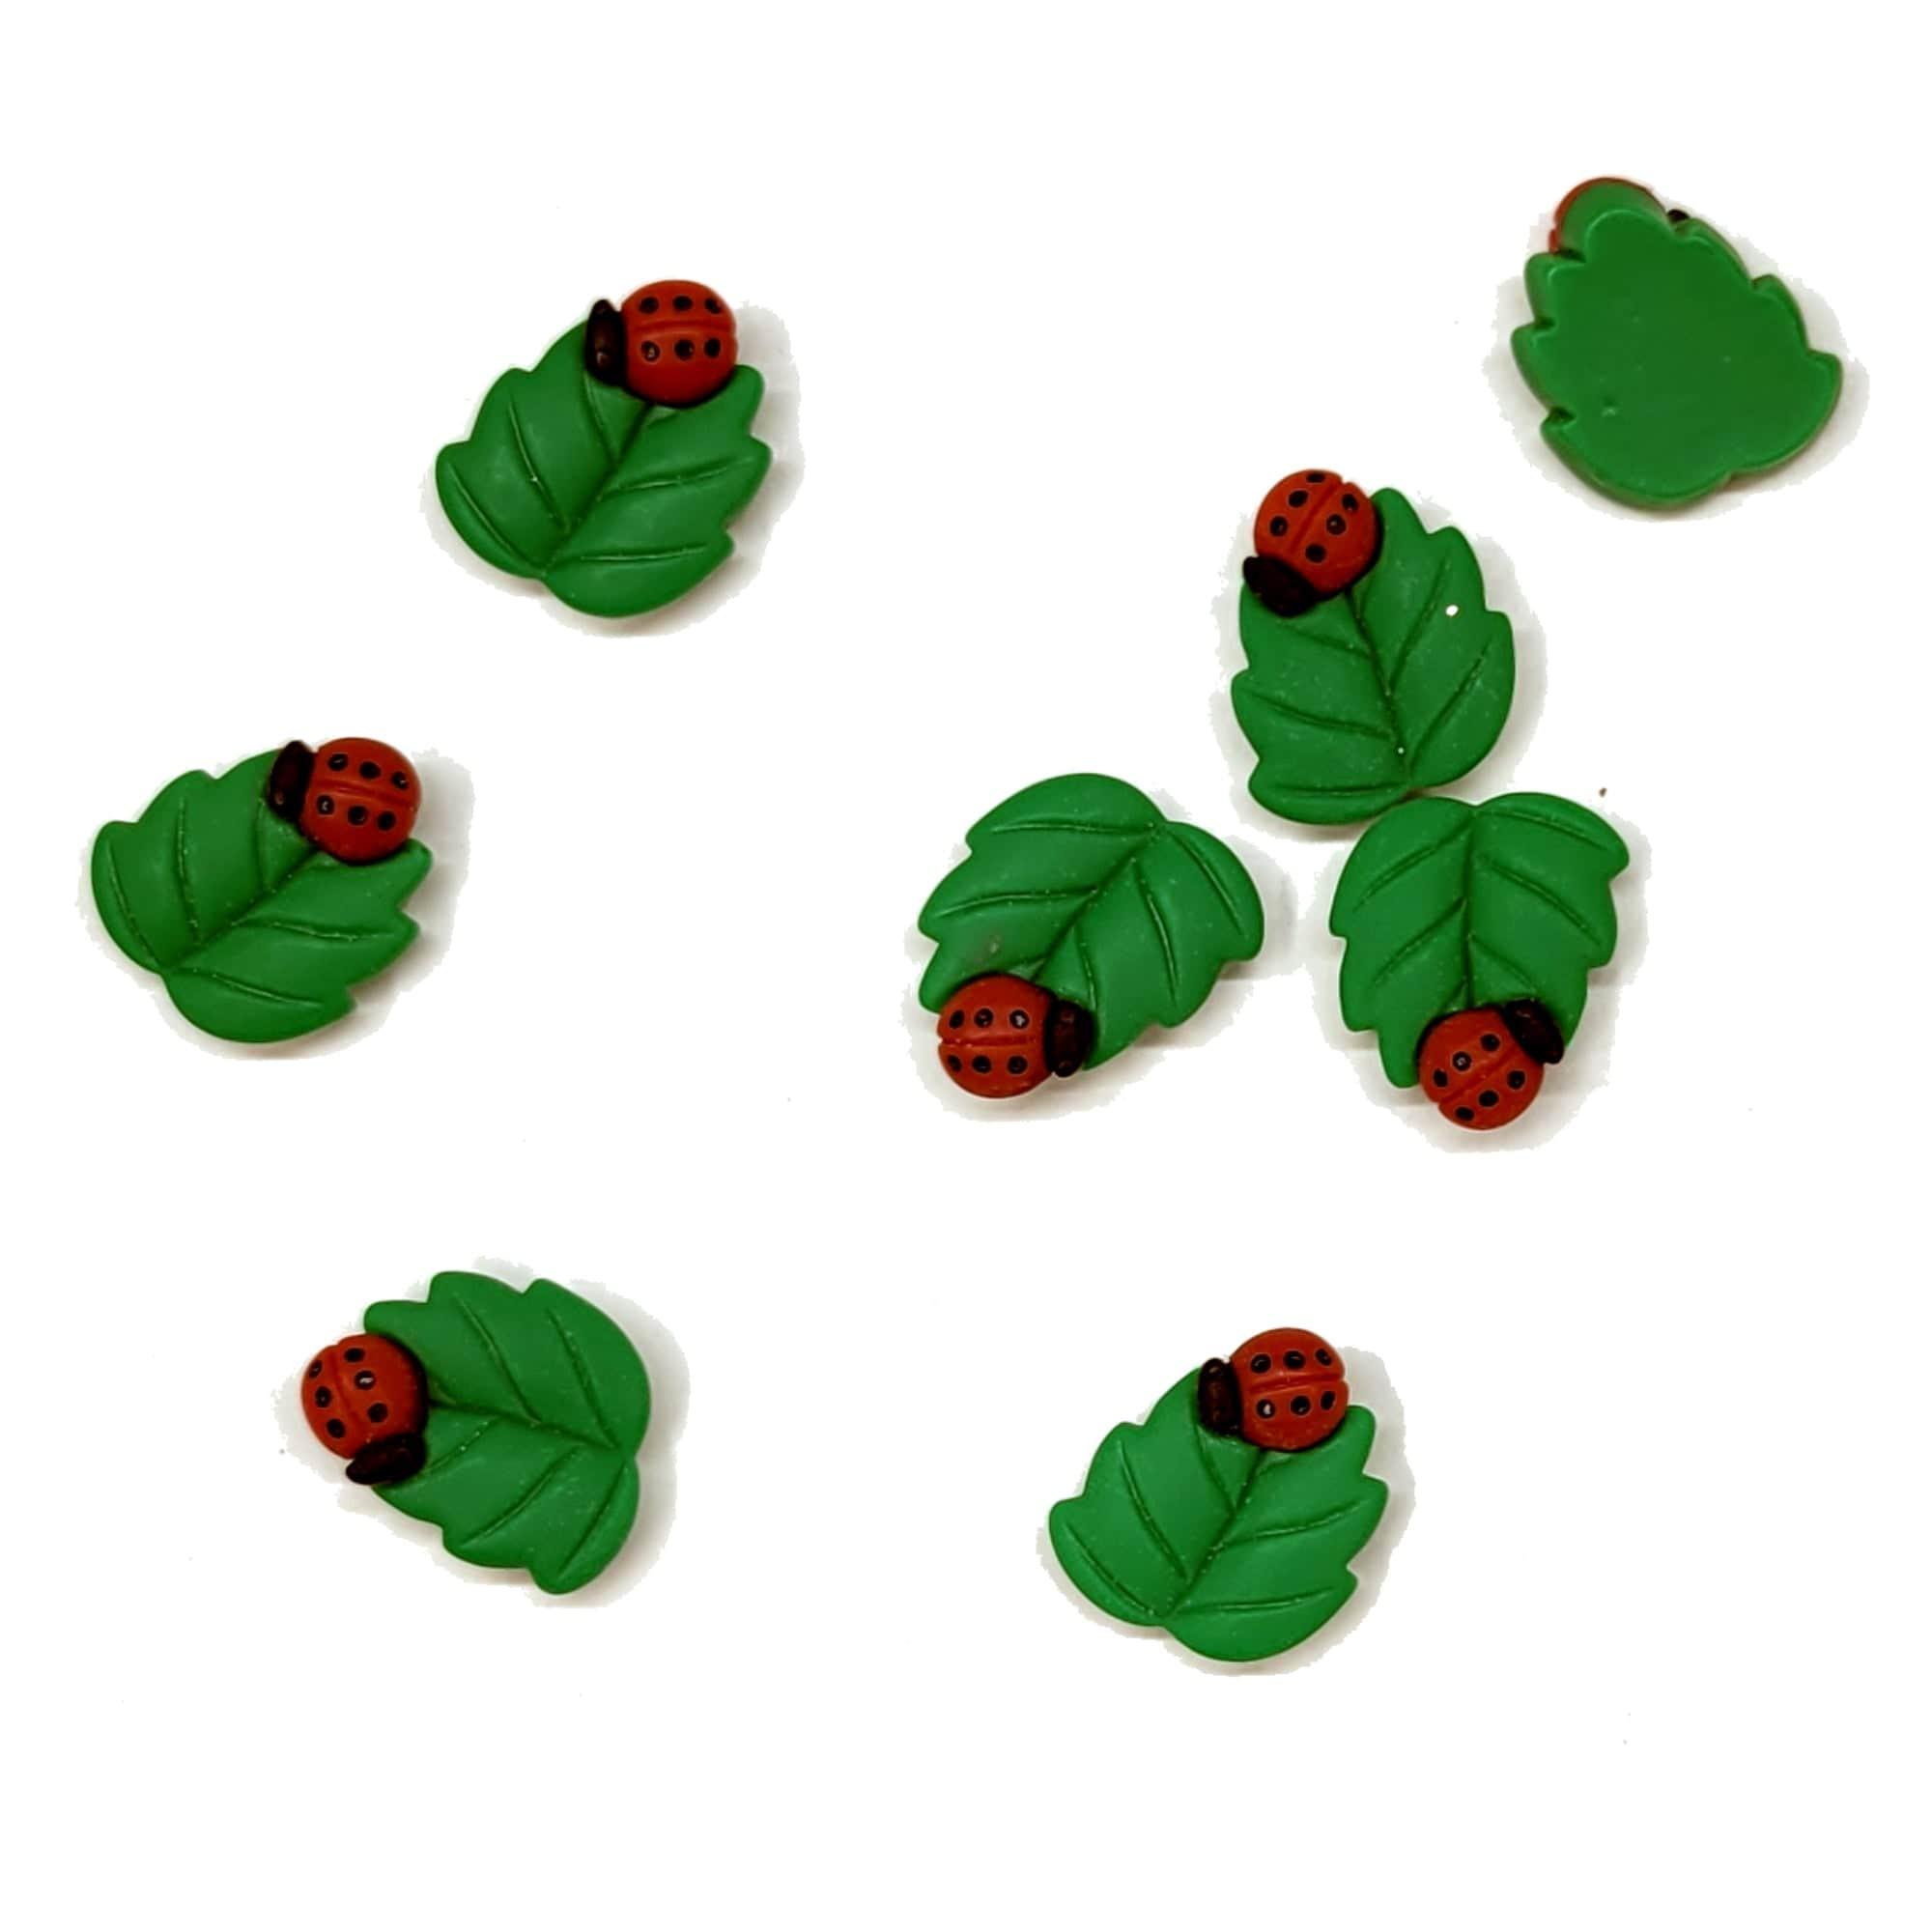 Lovely Ladybug Collection Ladybug On A Leaf Flatback Scrapbook Buttons by SSC Designs - 8 Pieces